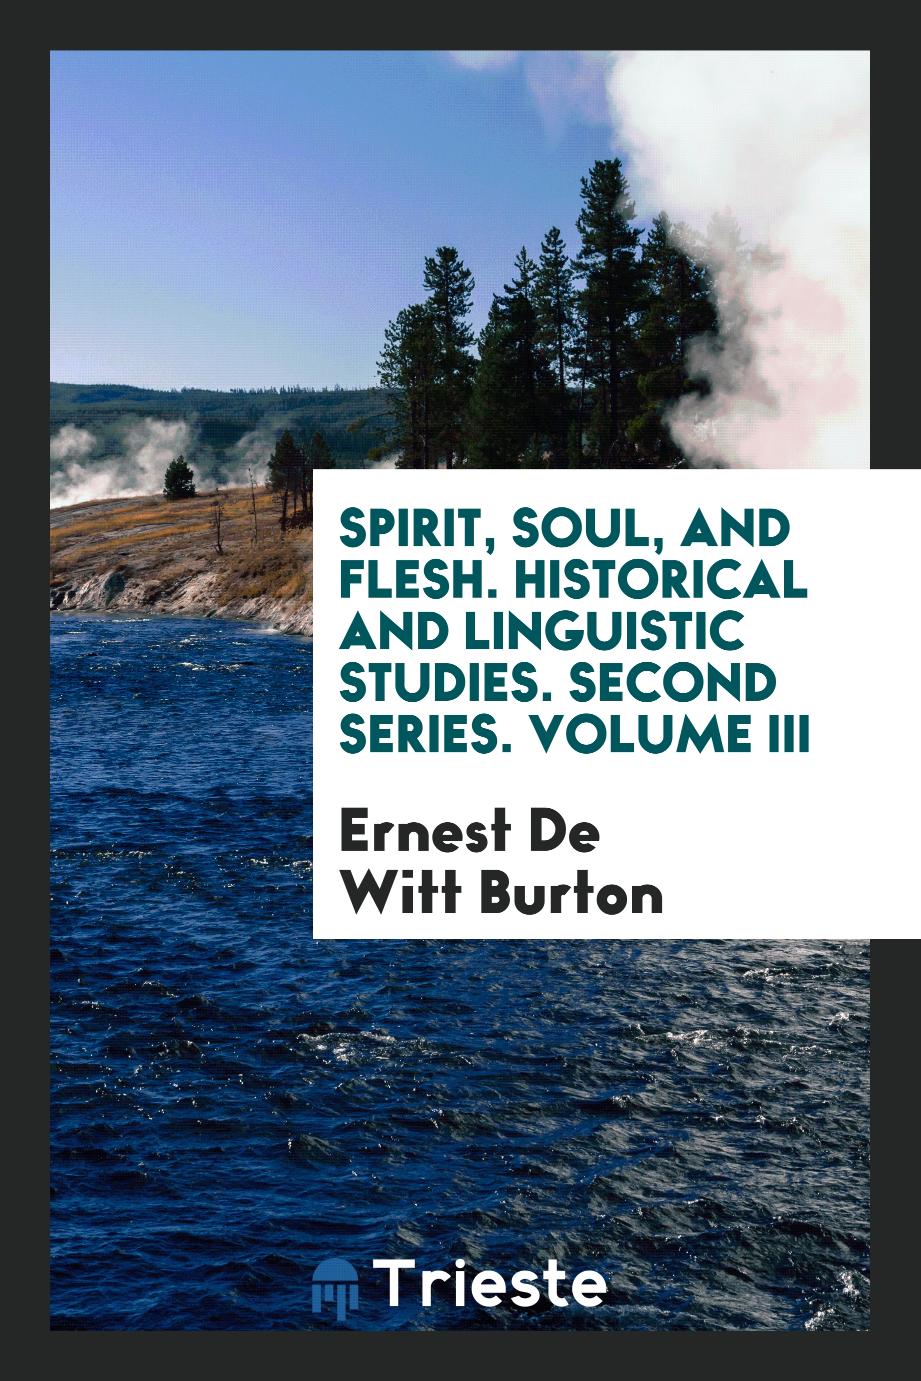 Spirit, soul, and flesh. Historical and linguistic studies. Second series. Volume III